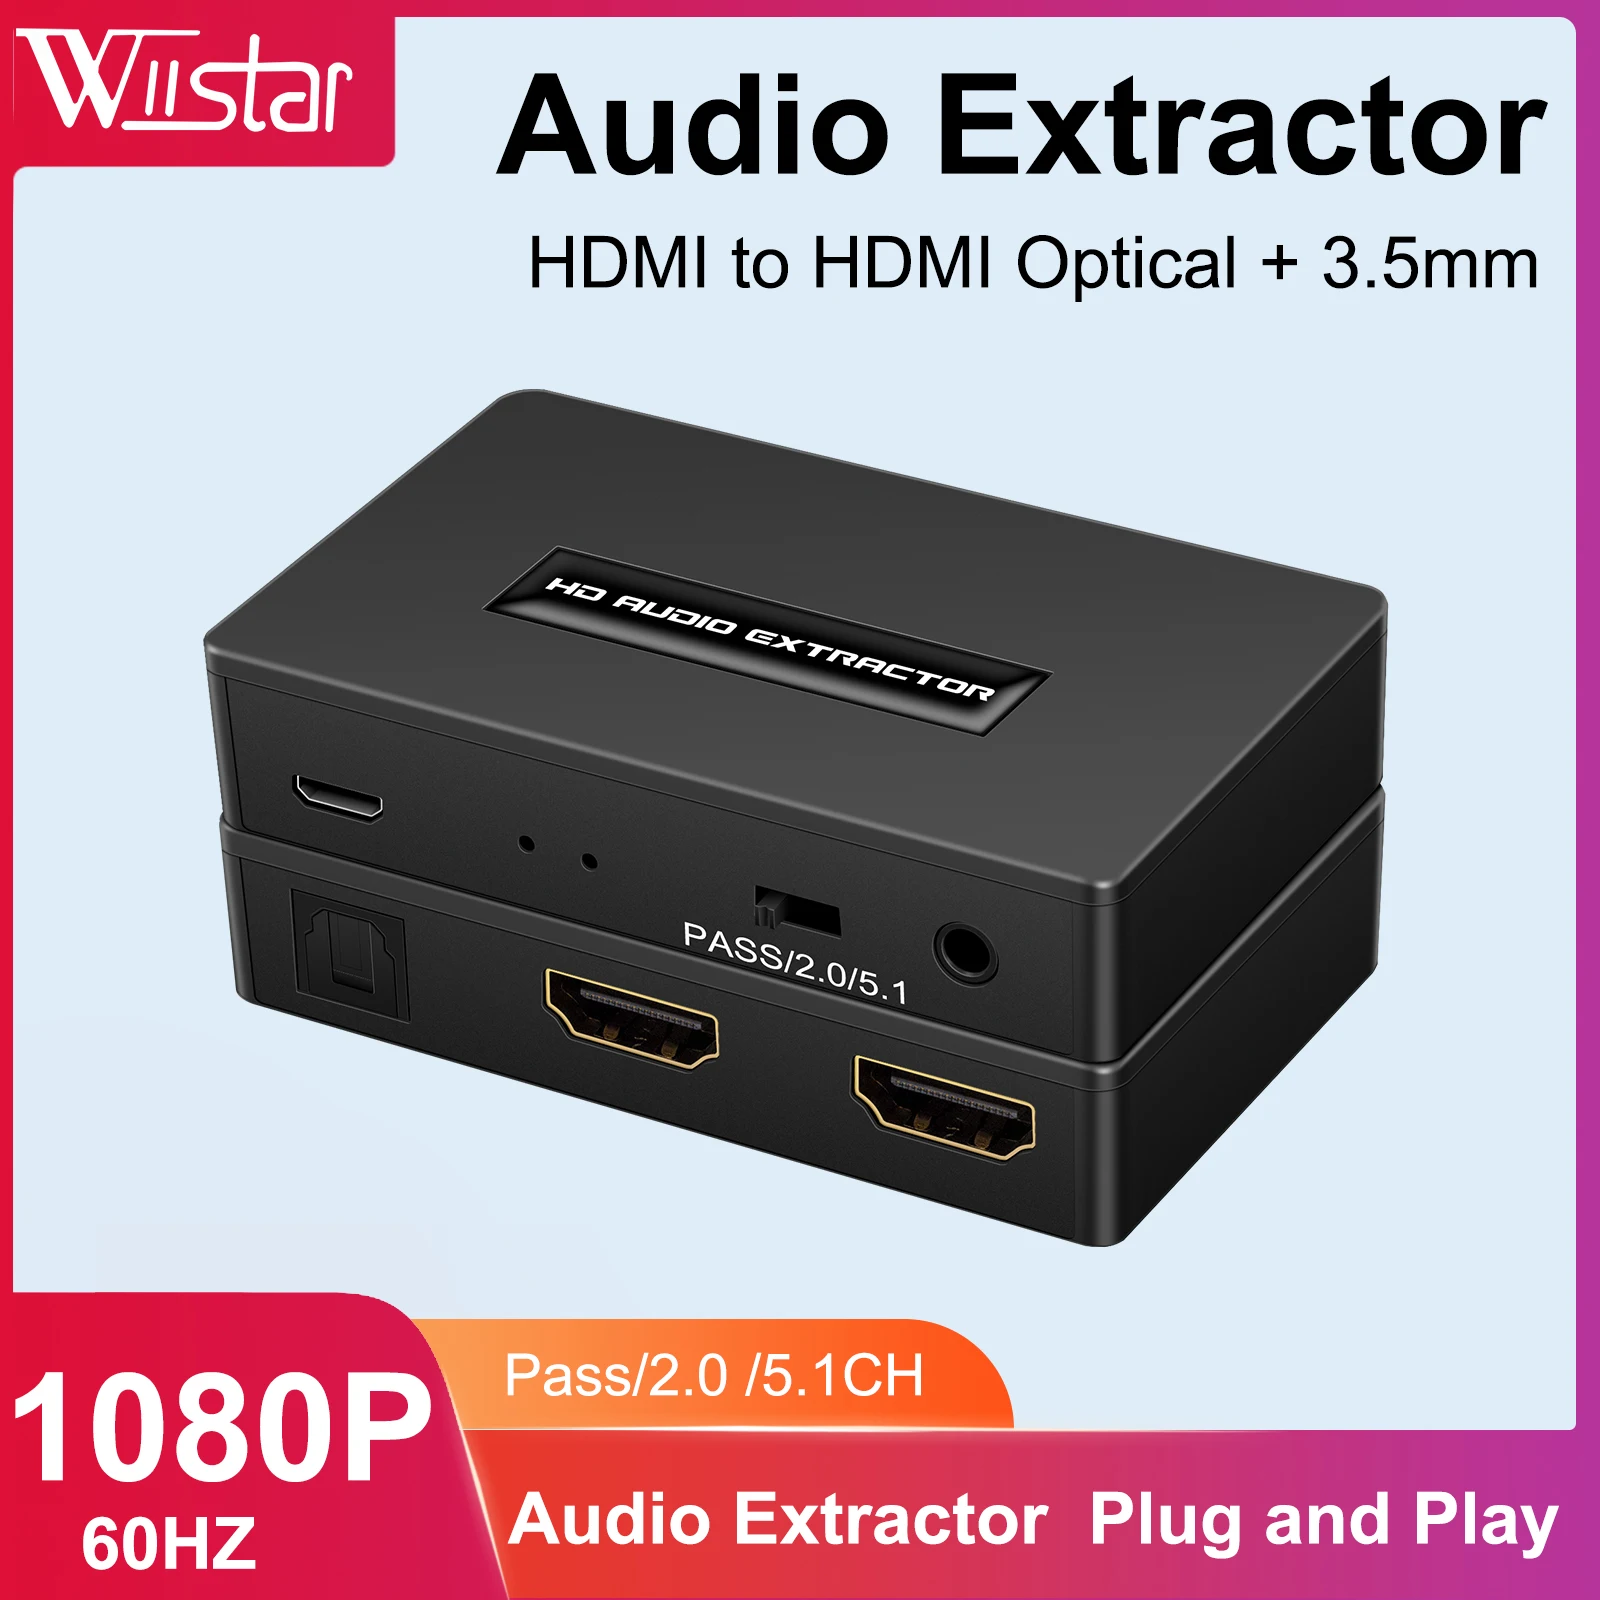 HDMI-compatible Audio Extractor HDMI to HDMI Optical TOSLINK SPDIF + 3.5mm Stereo Extractor Audio Splitter with usb cable